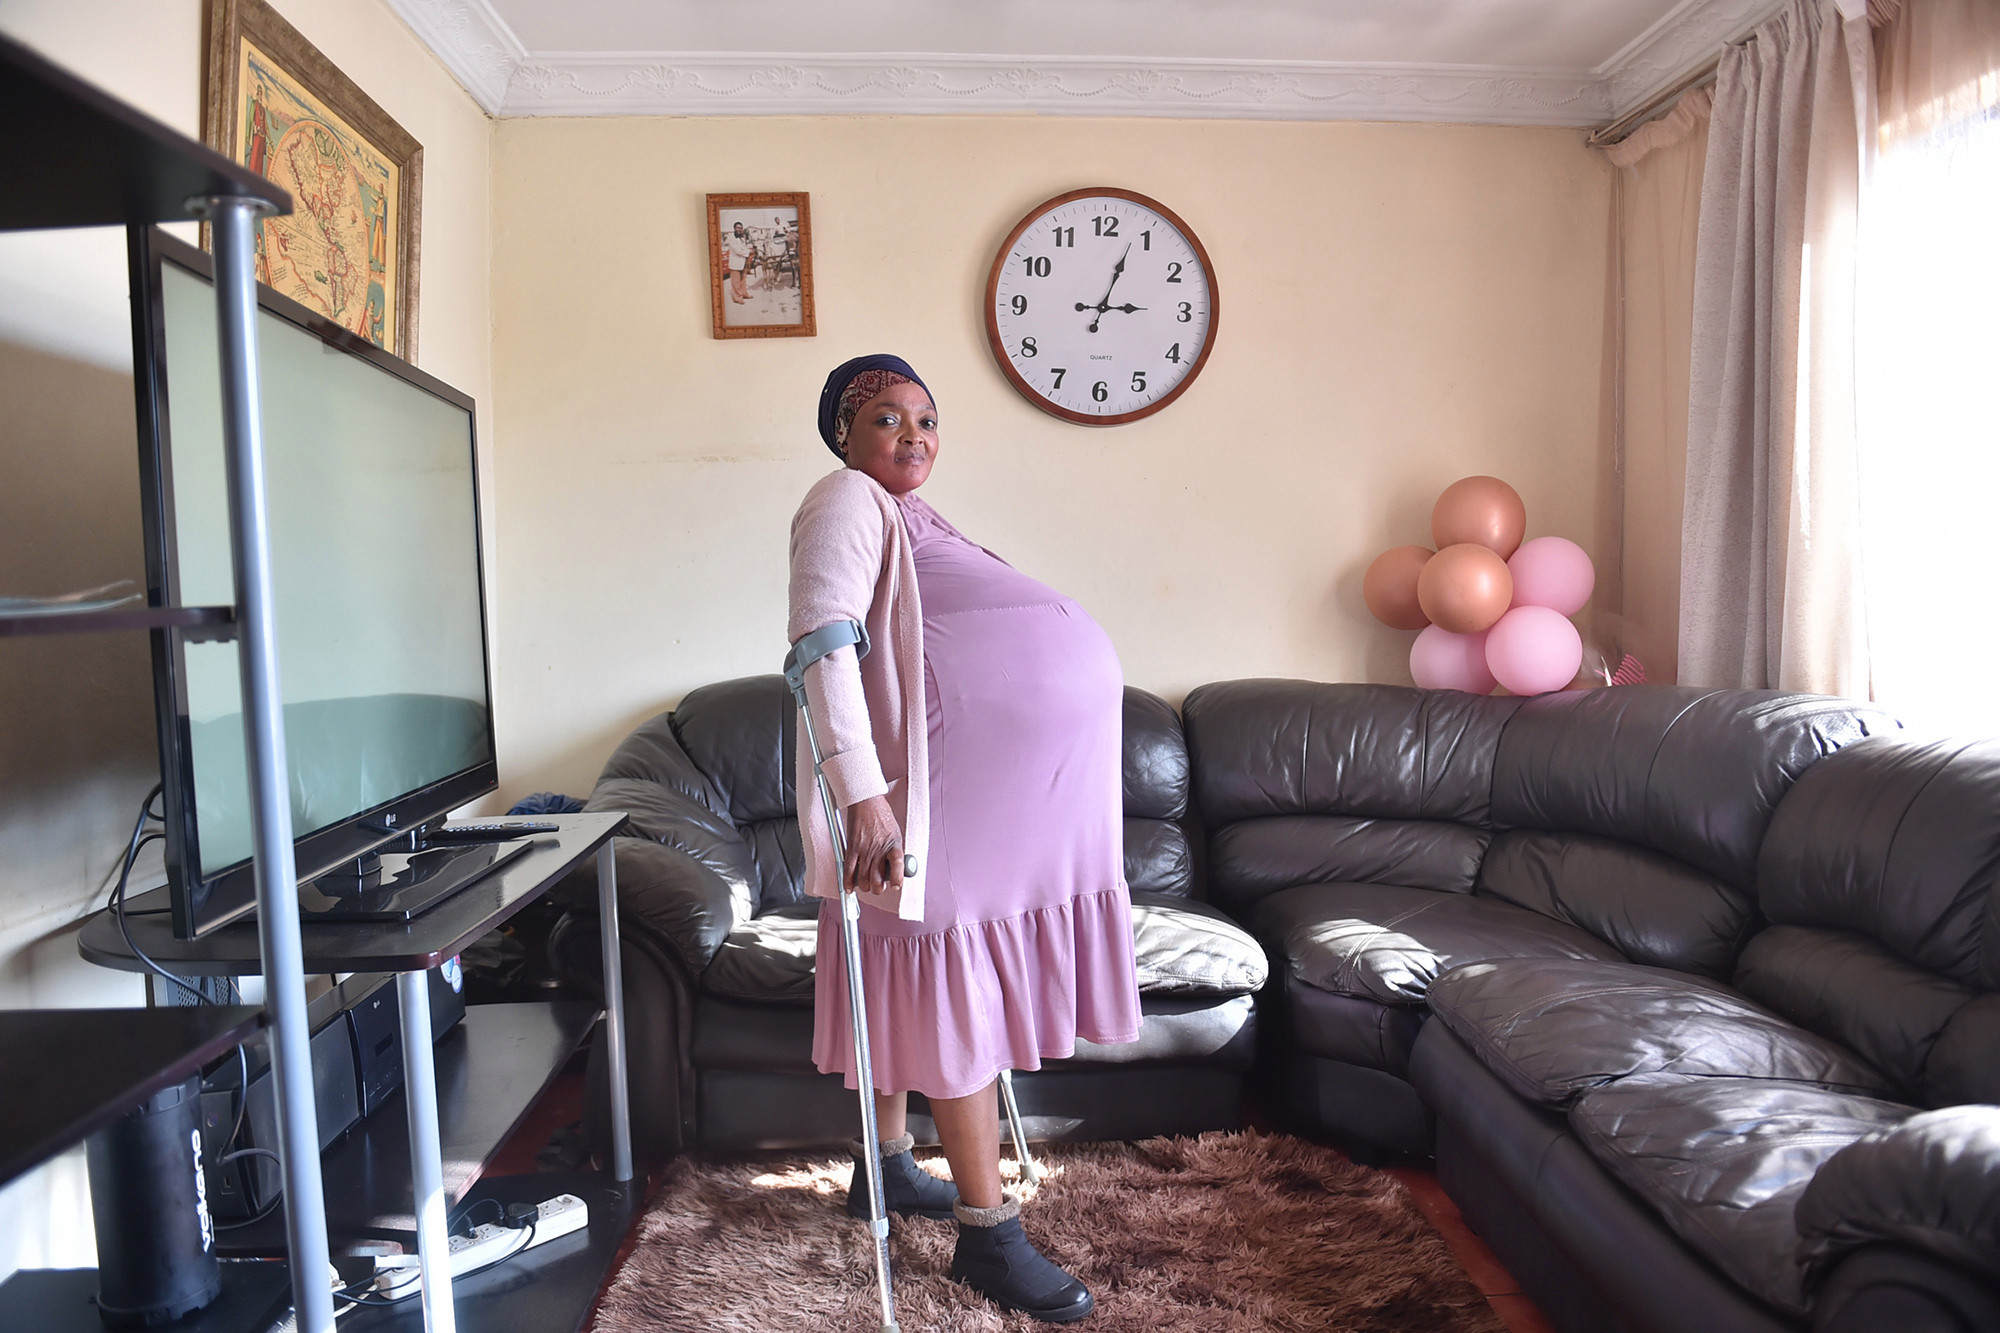 Gosiame Thamara Sithole said her pregnancy was natural and had not received any fertility treatment.